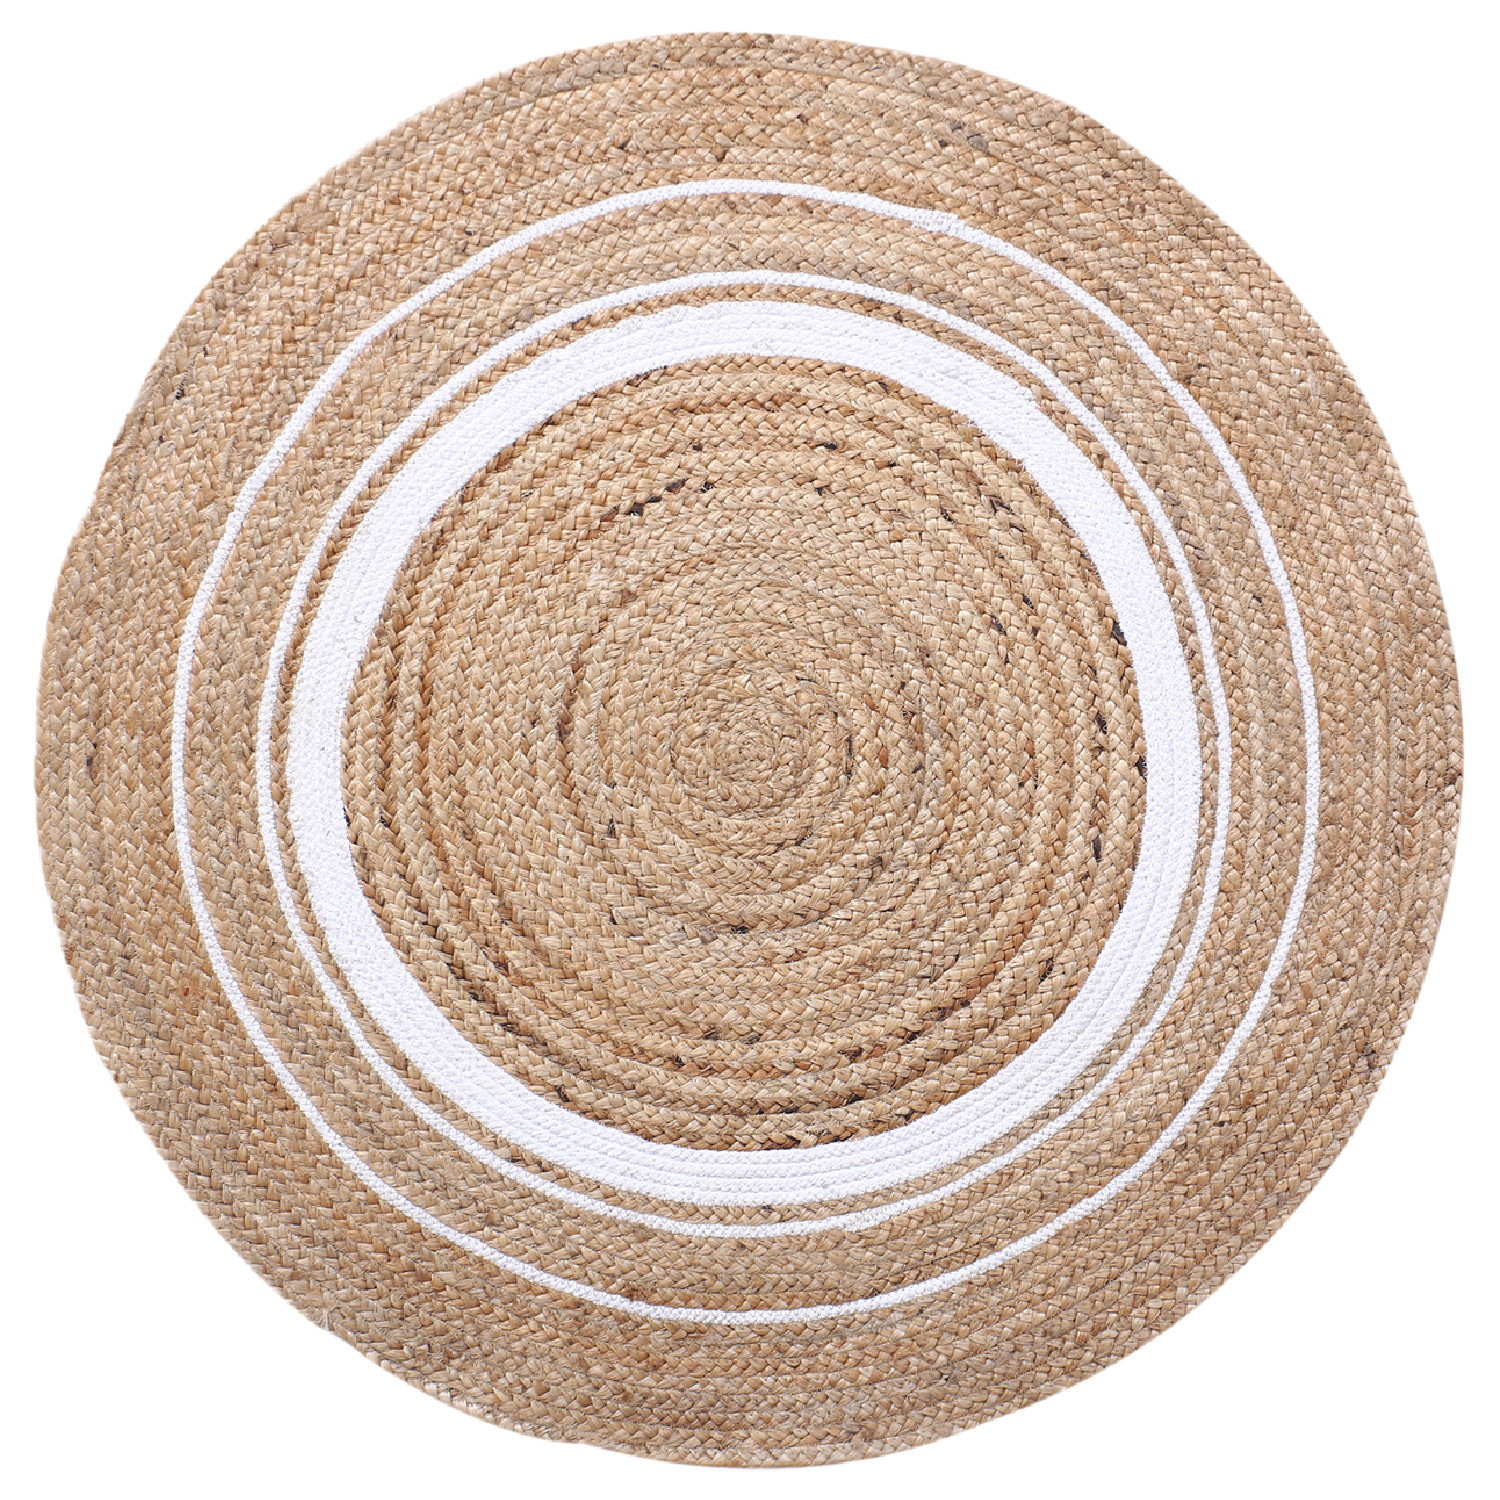 Kuber Industries Hand Woven Braided Carpet Rugs|Anti-Skid Round Traditional Spiral Design Jute Door mat|Mat For Bedroom,Living Room,Dining Room,Yoga,92 x 92 cm,(White)